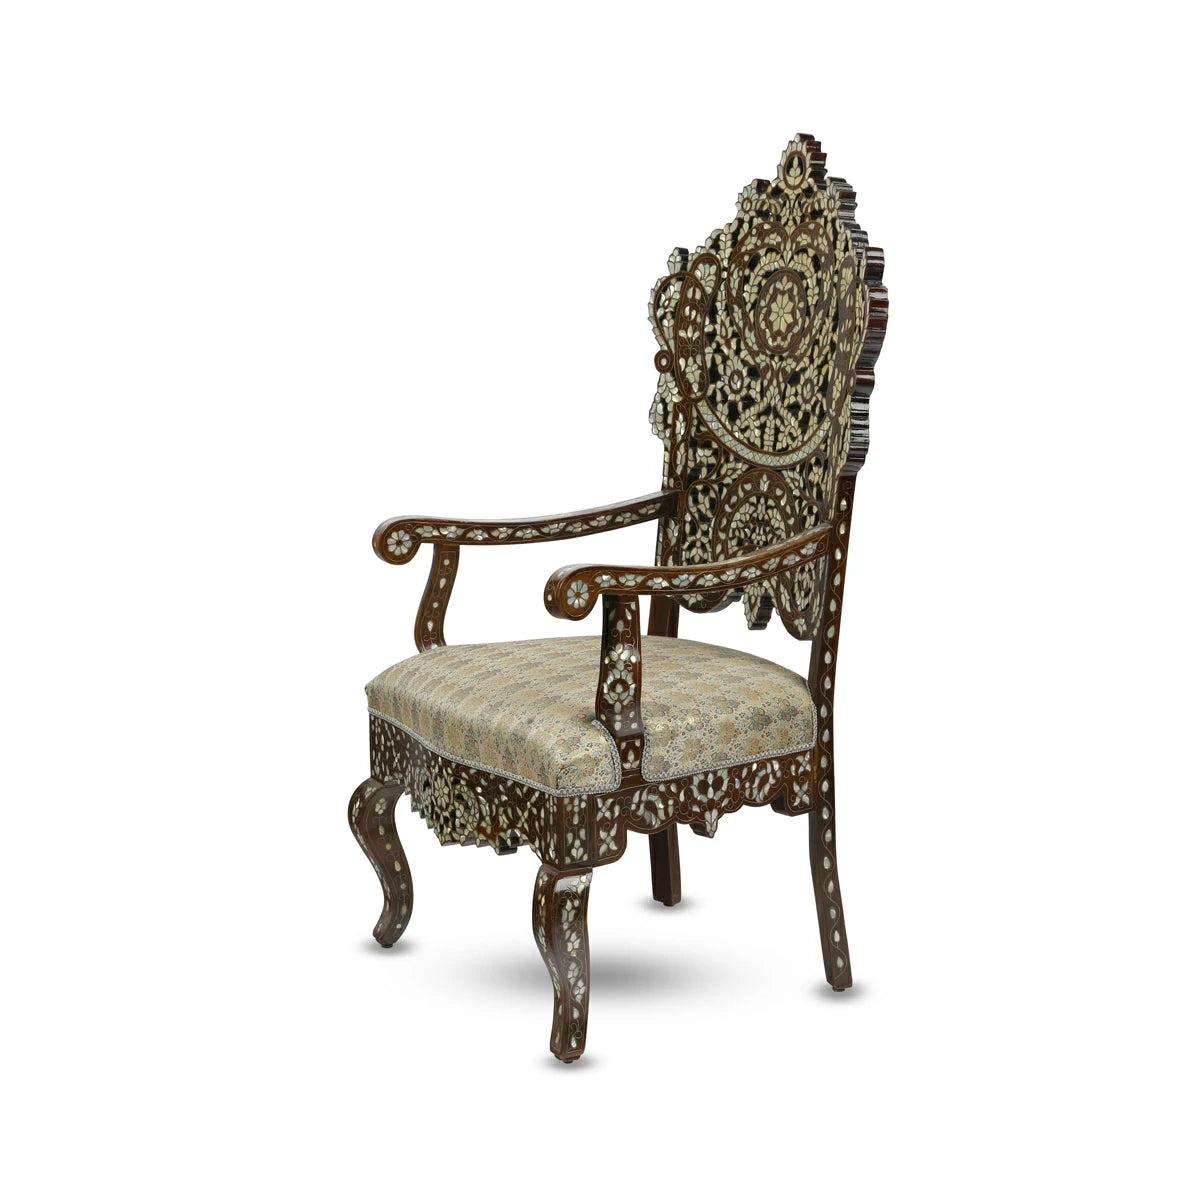 Angled Side View of Early Ottoman Style Chair